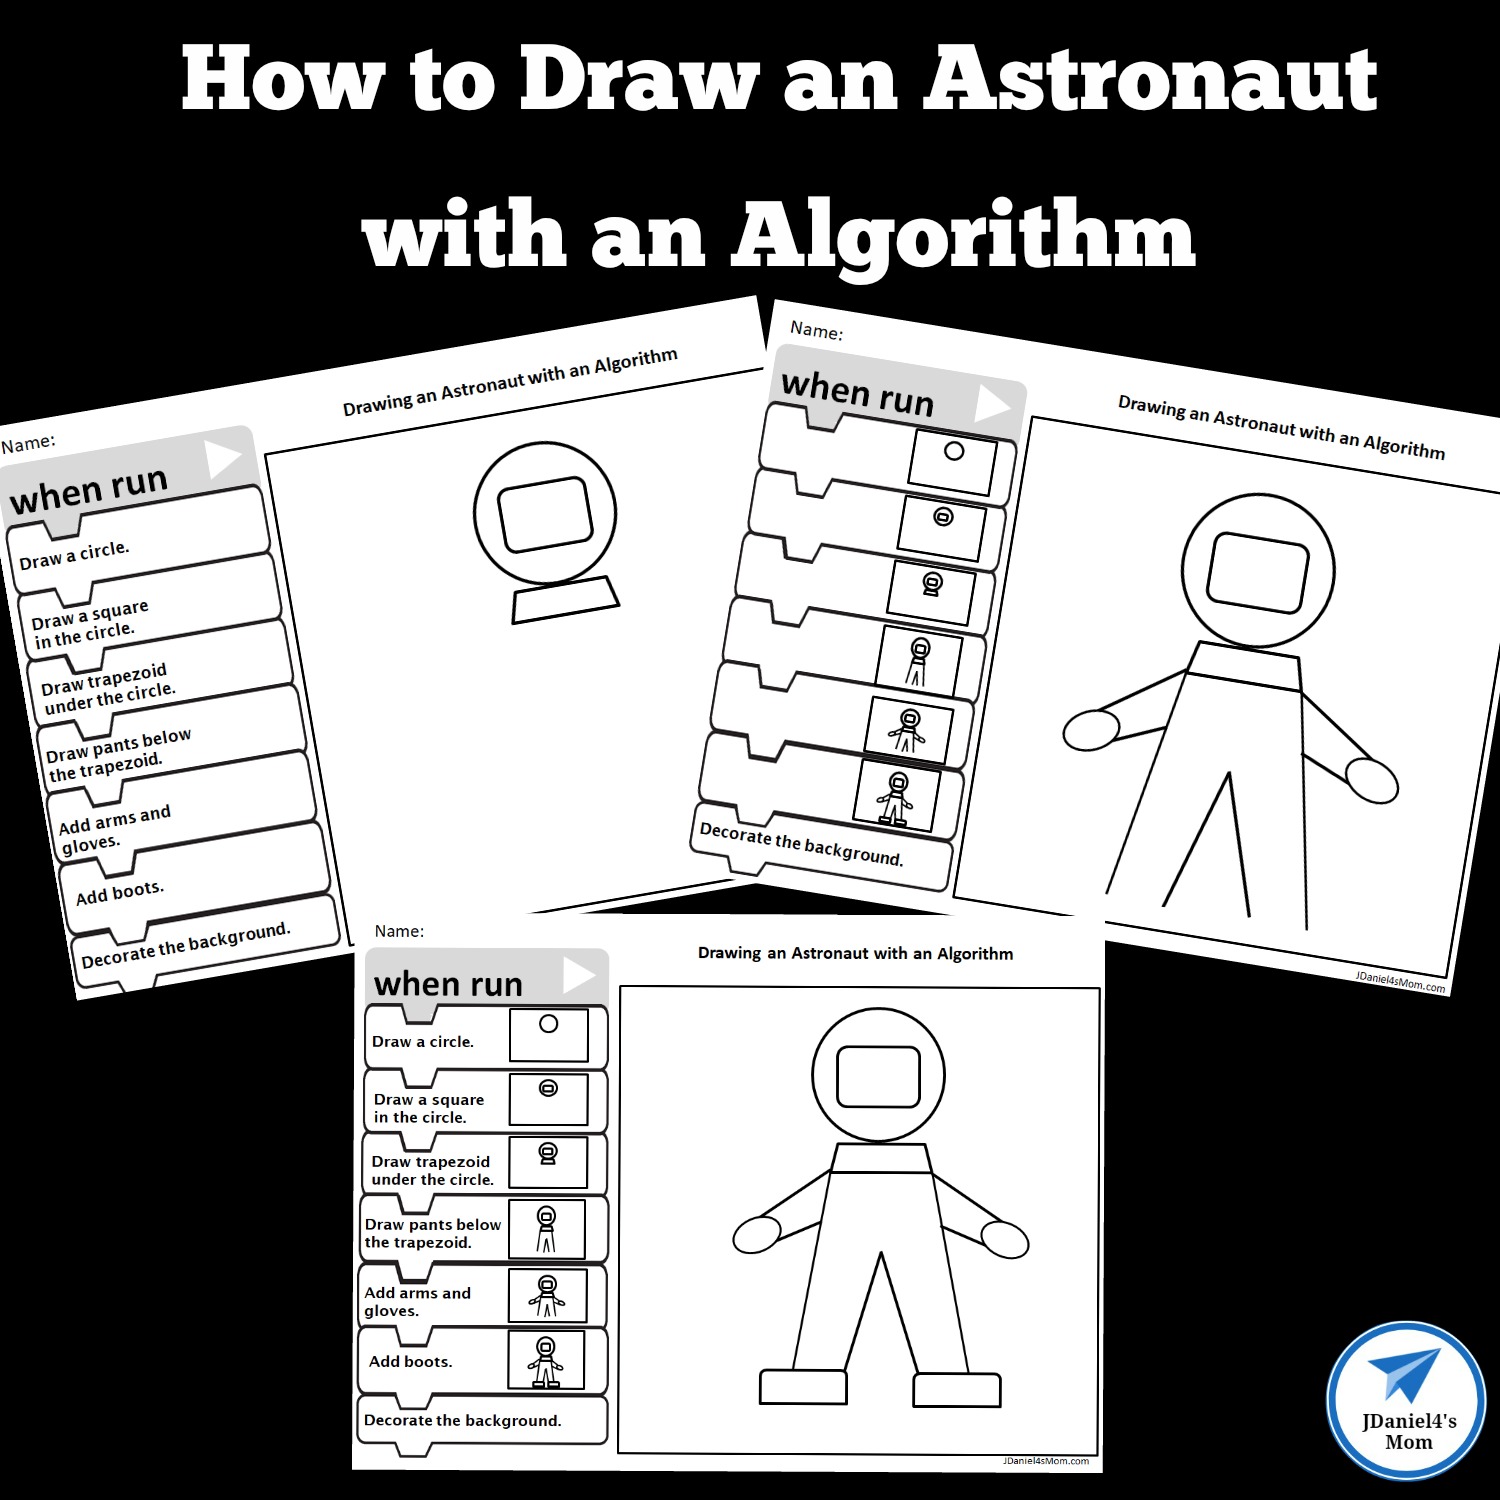 How to Draw an Astronaut with an Algorithm 